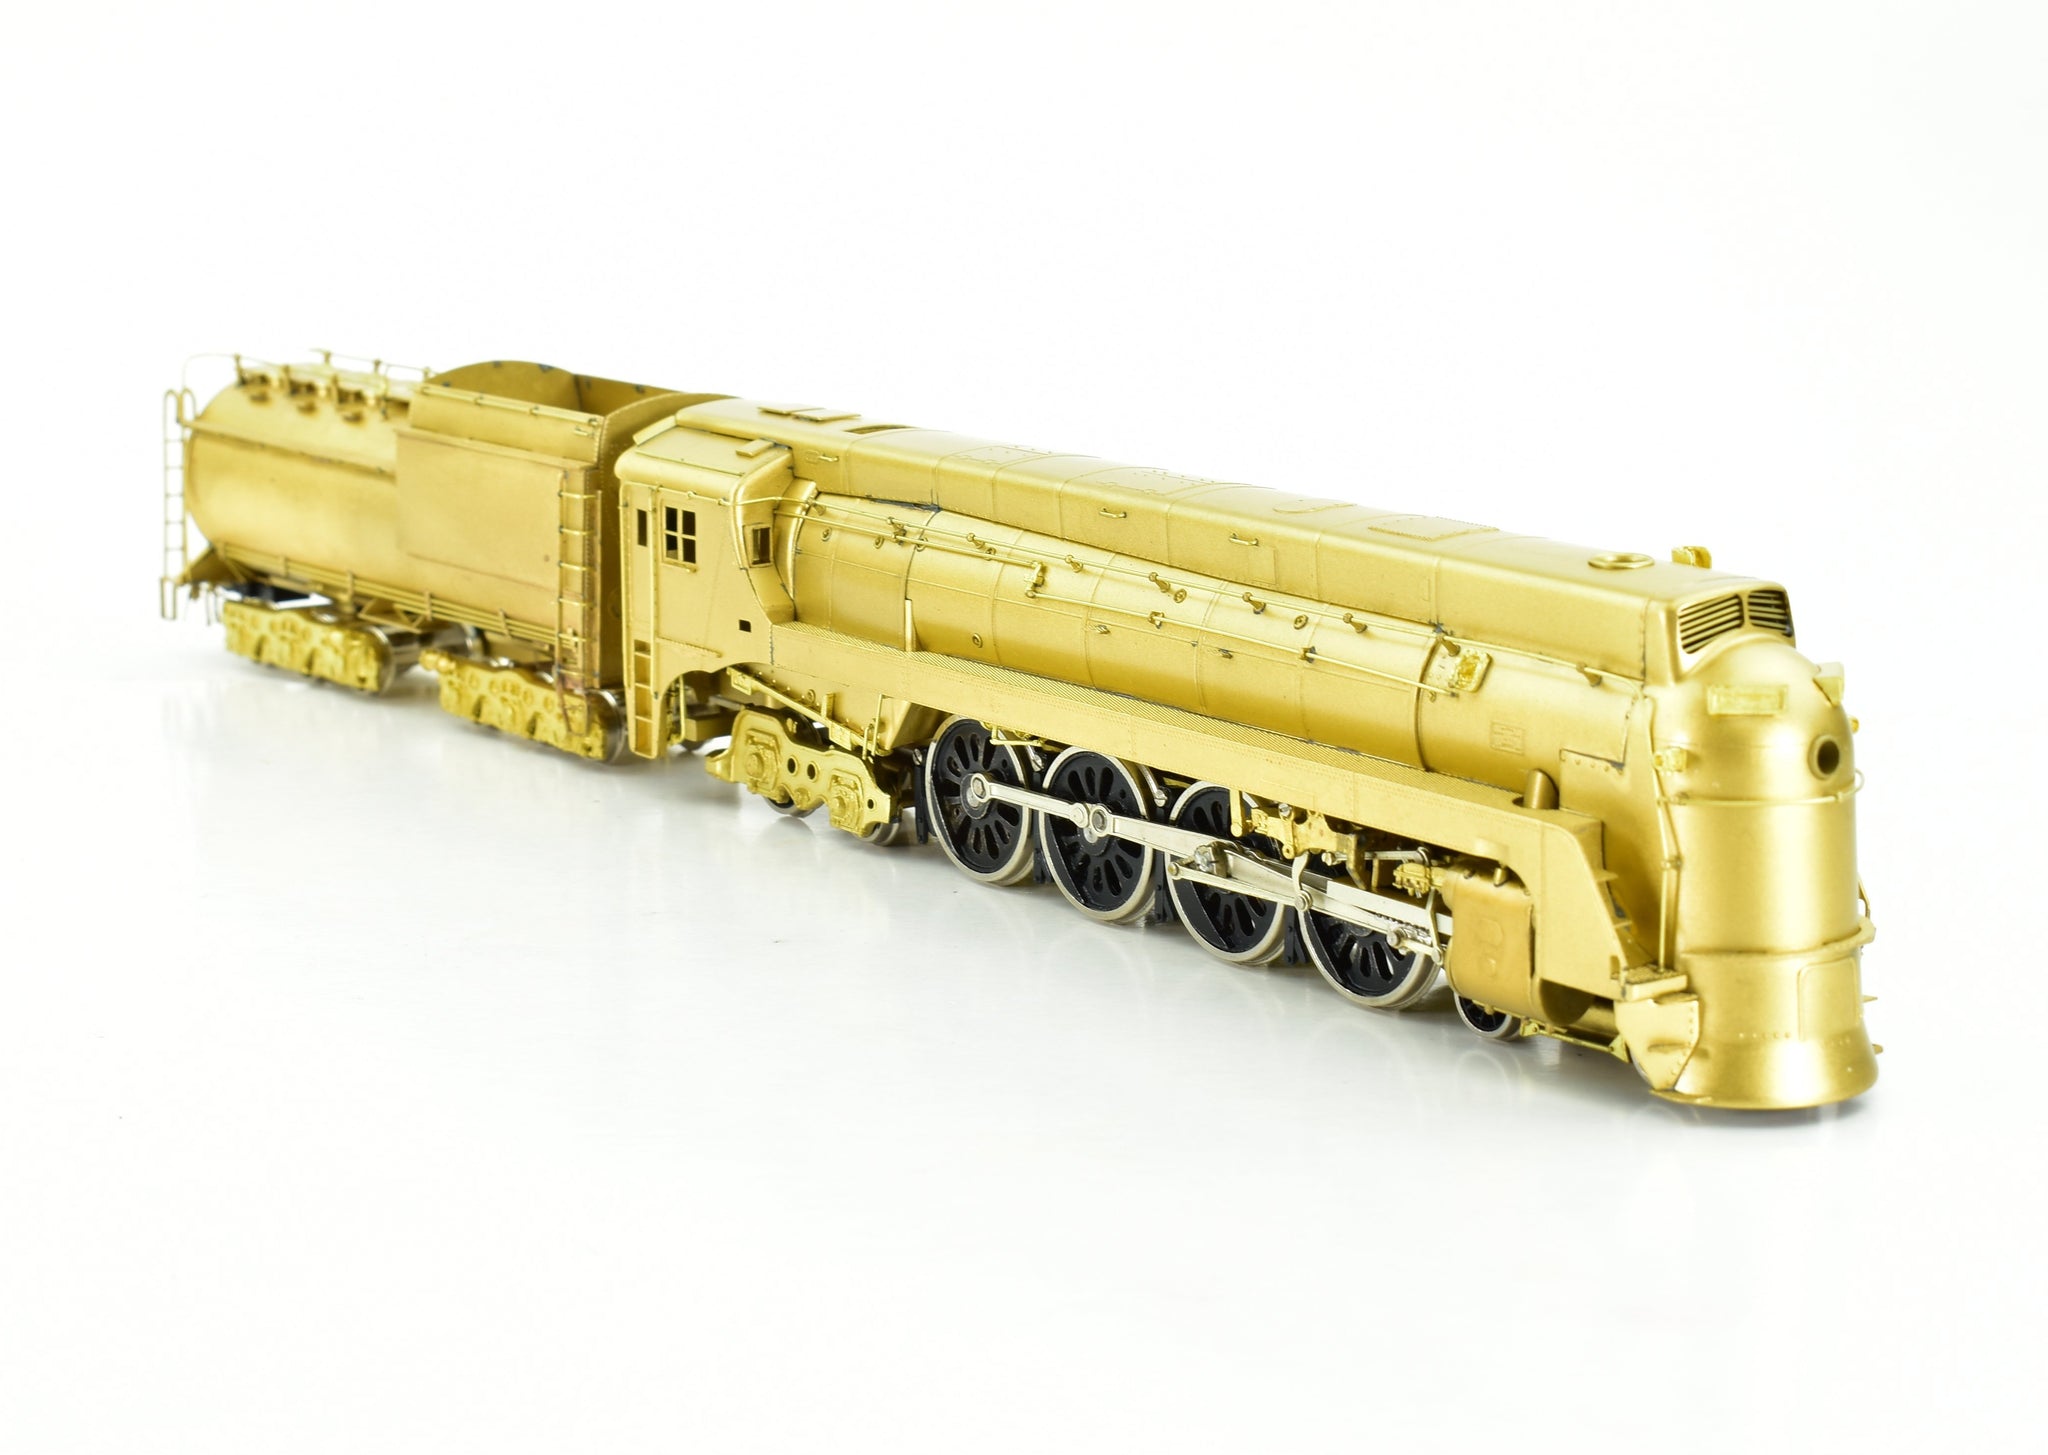 HO Scale: Brass unknown, 4 x AT&SF Tender for 4-8-4, UHE-234+